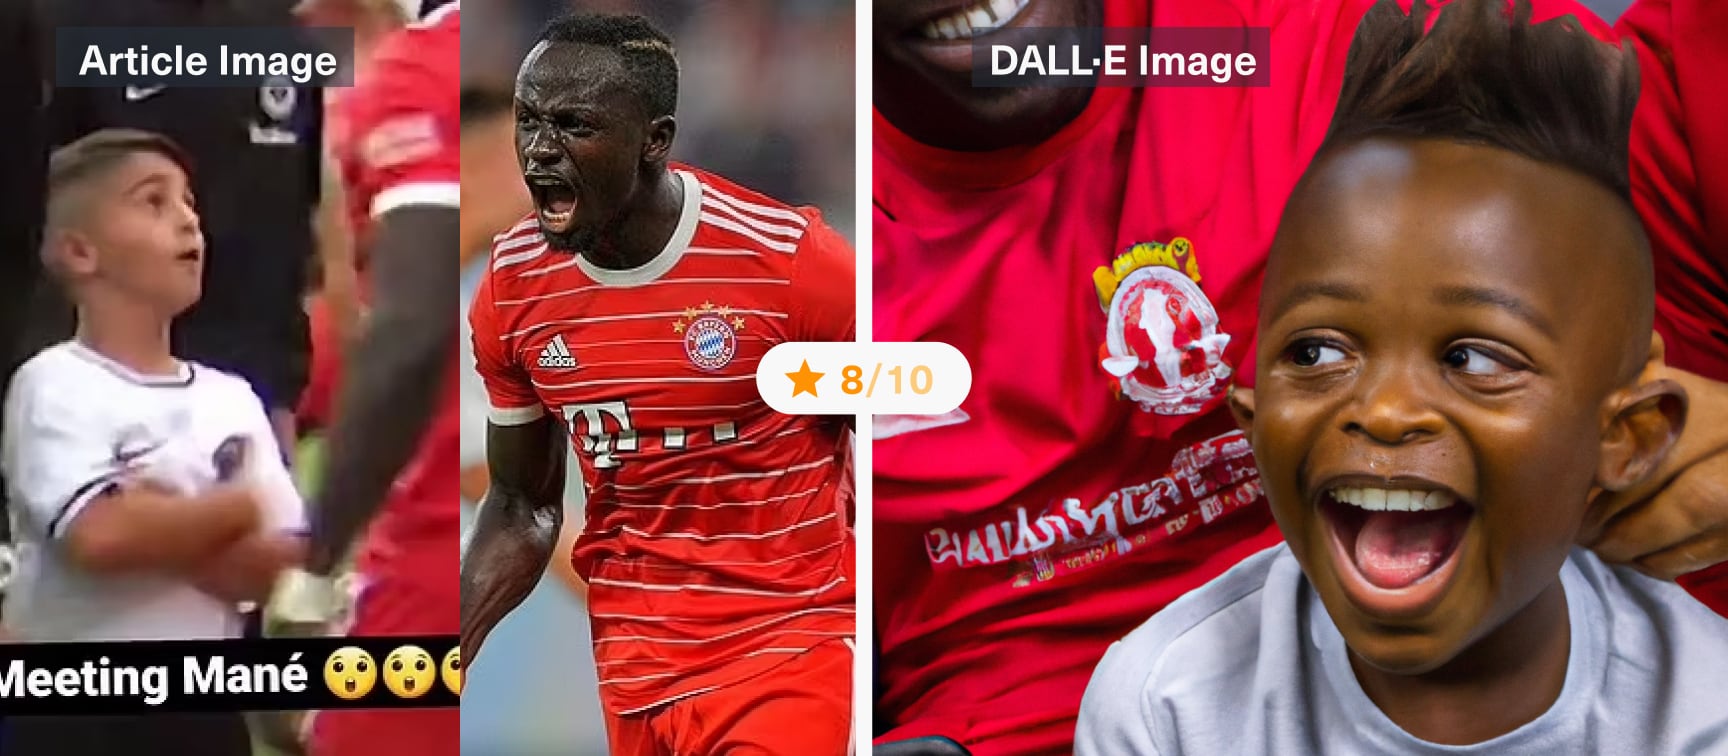 DALL-E meets News API: “The hilarious moment a young child is left totally starstruck by Bayern Munich's Sadio Mane”